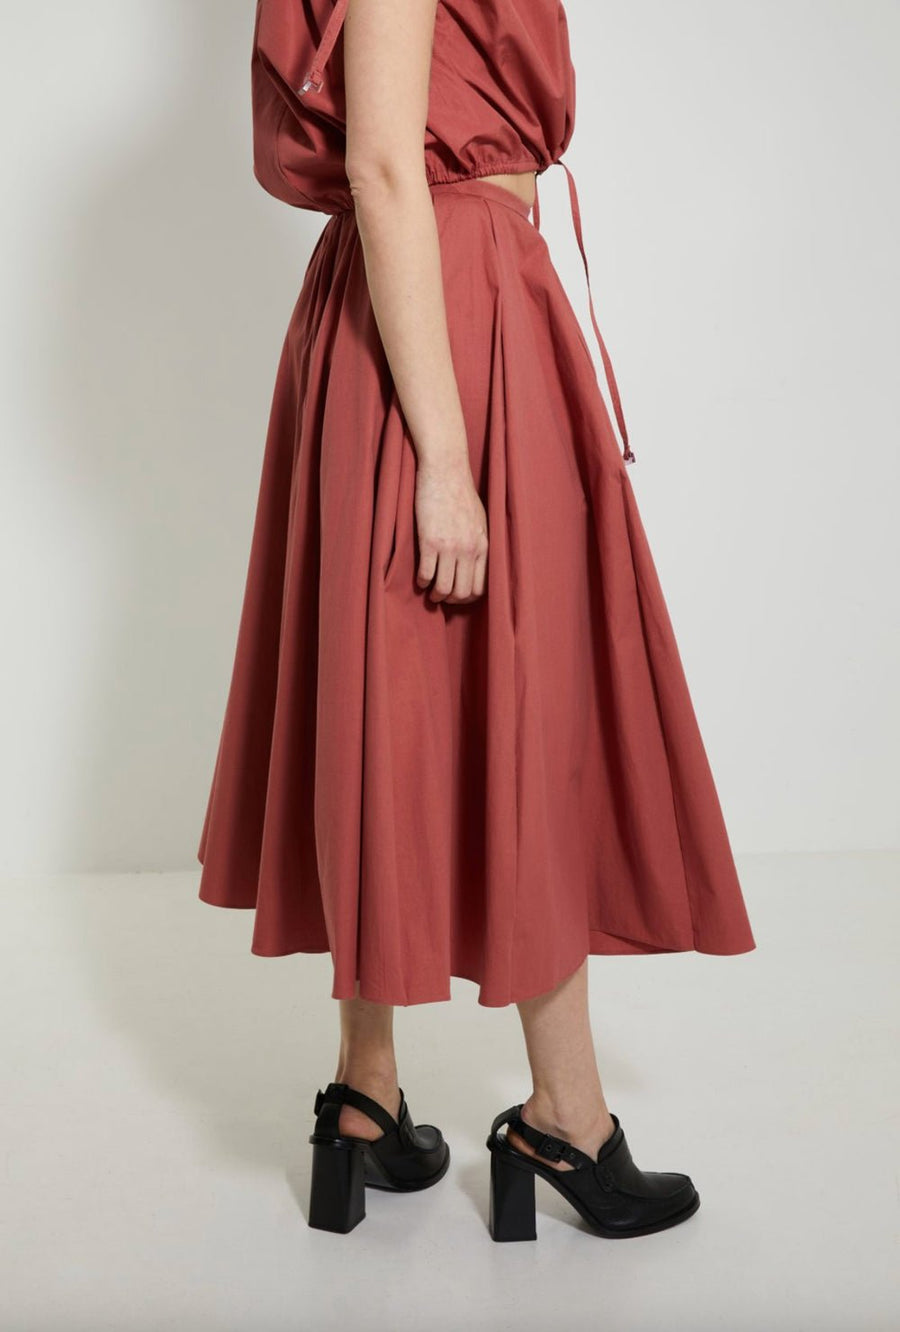 VERONIQUE LEROY - Cotton Poplin Pleated Circle Skirt in Canyon